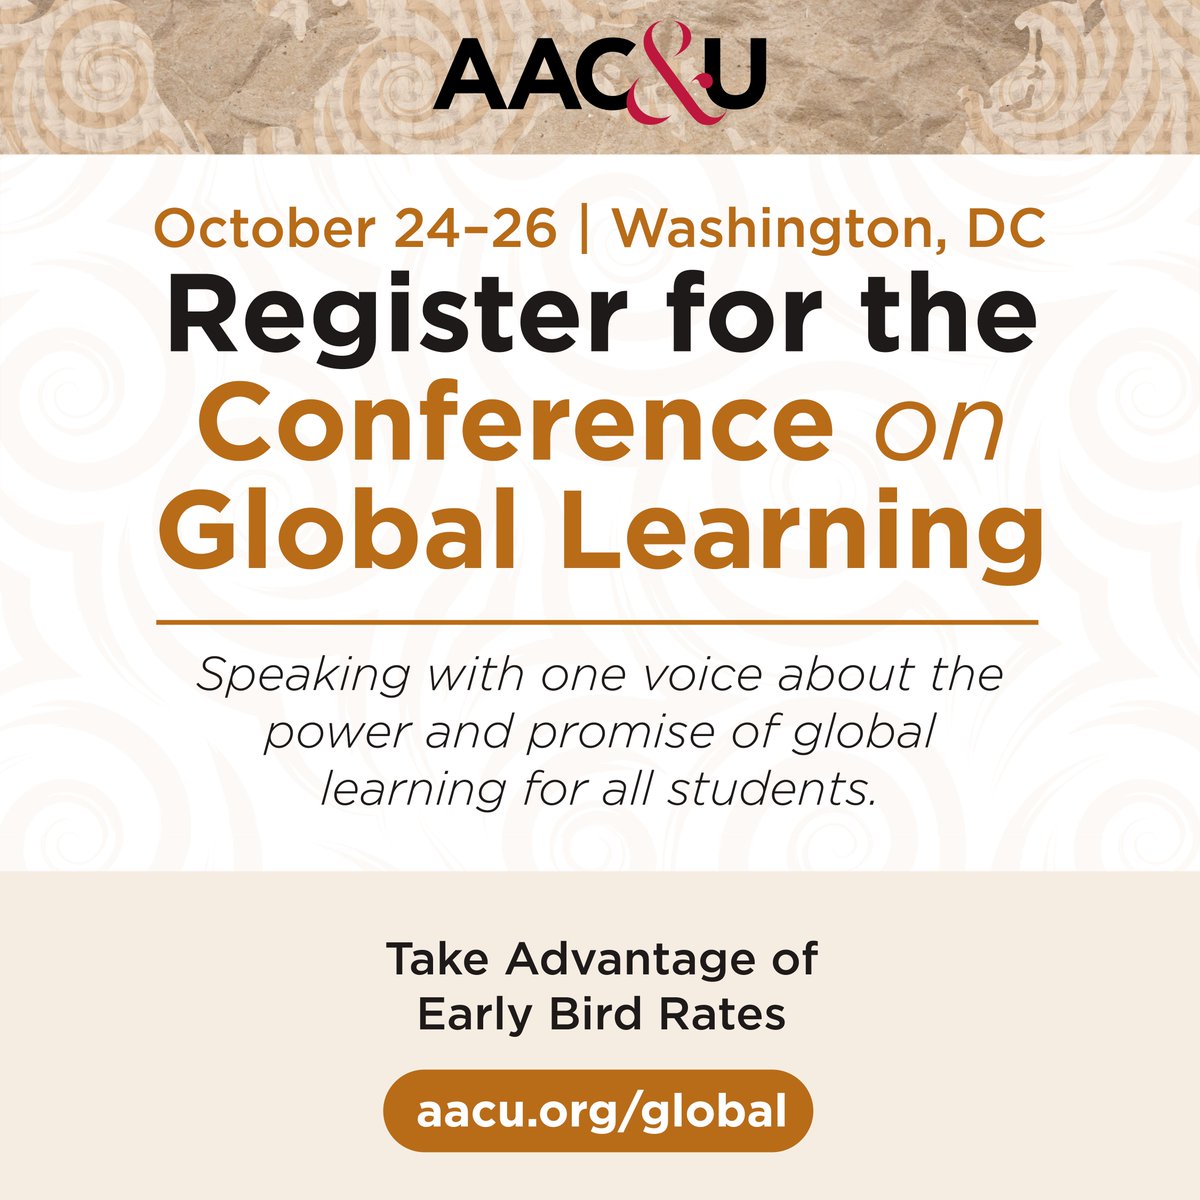 Register for the AAC&U Conference on Global Learning and take advantage of early bird rates! #AACUGlobal is the premier event showcasing global learning activities, programs, and strategies educators use to prepare students for an interconnected world. aacu.org/global